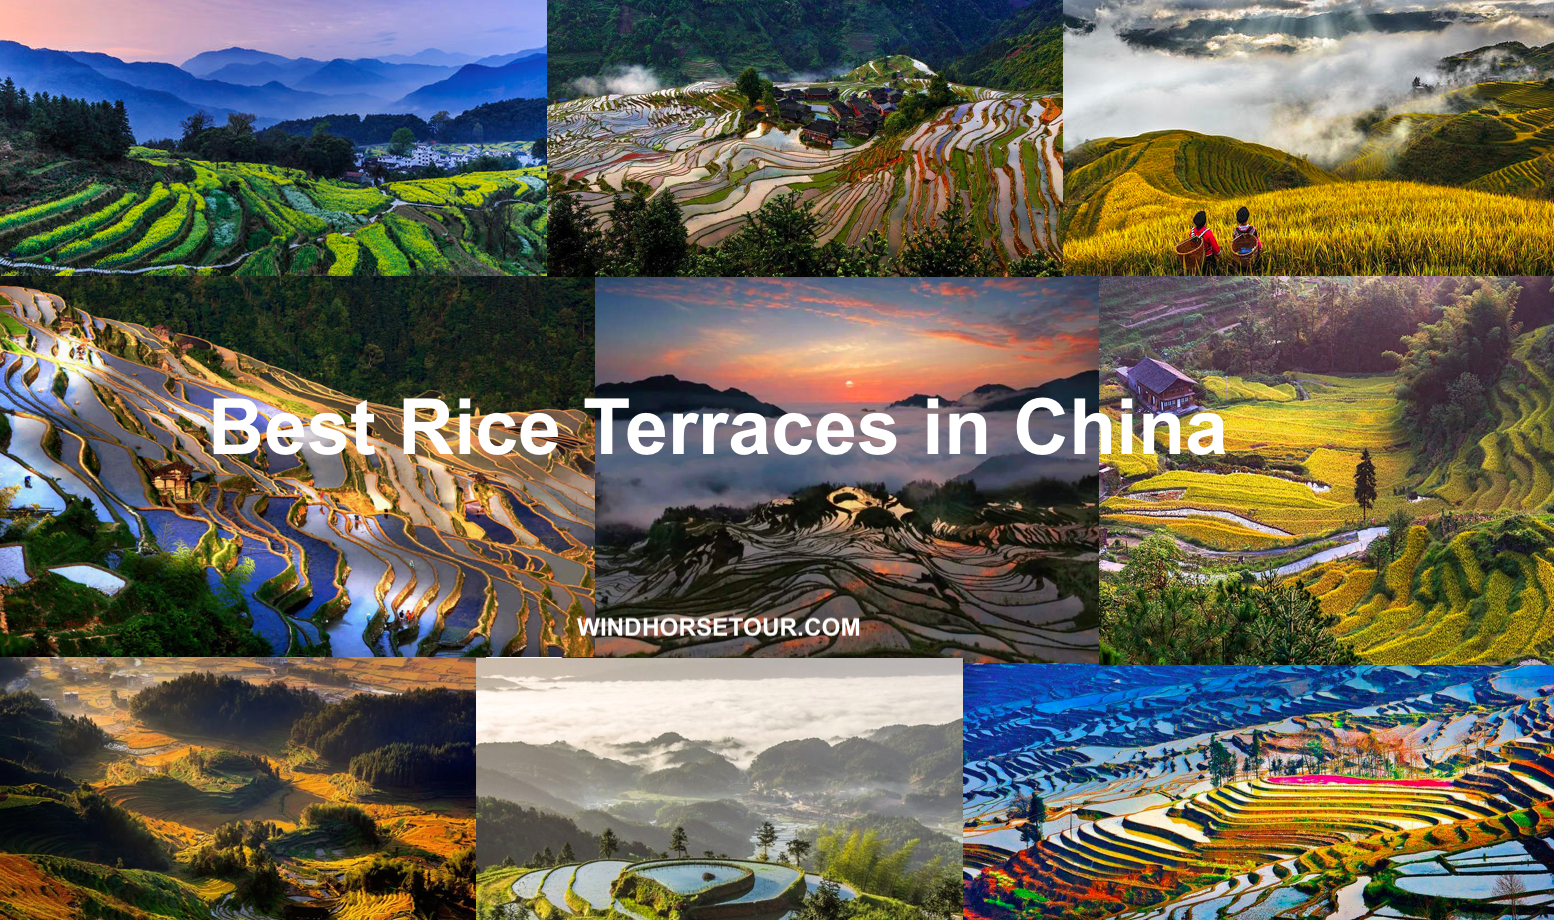 China's best Rice Terraces